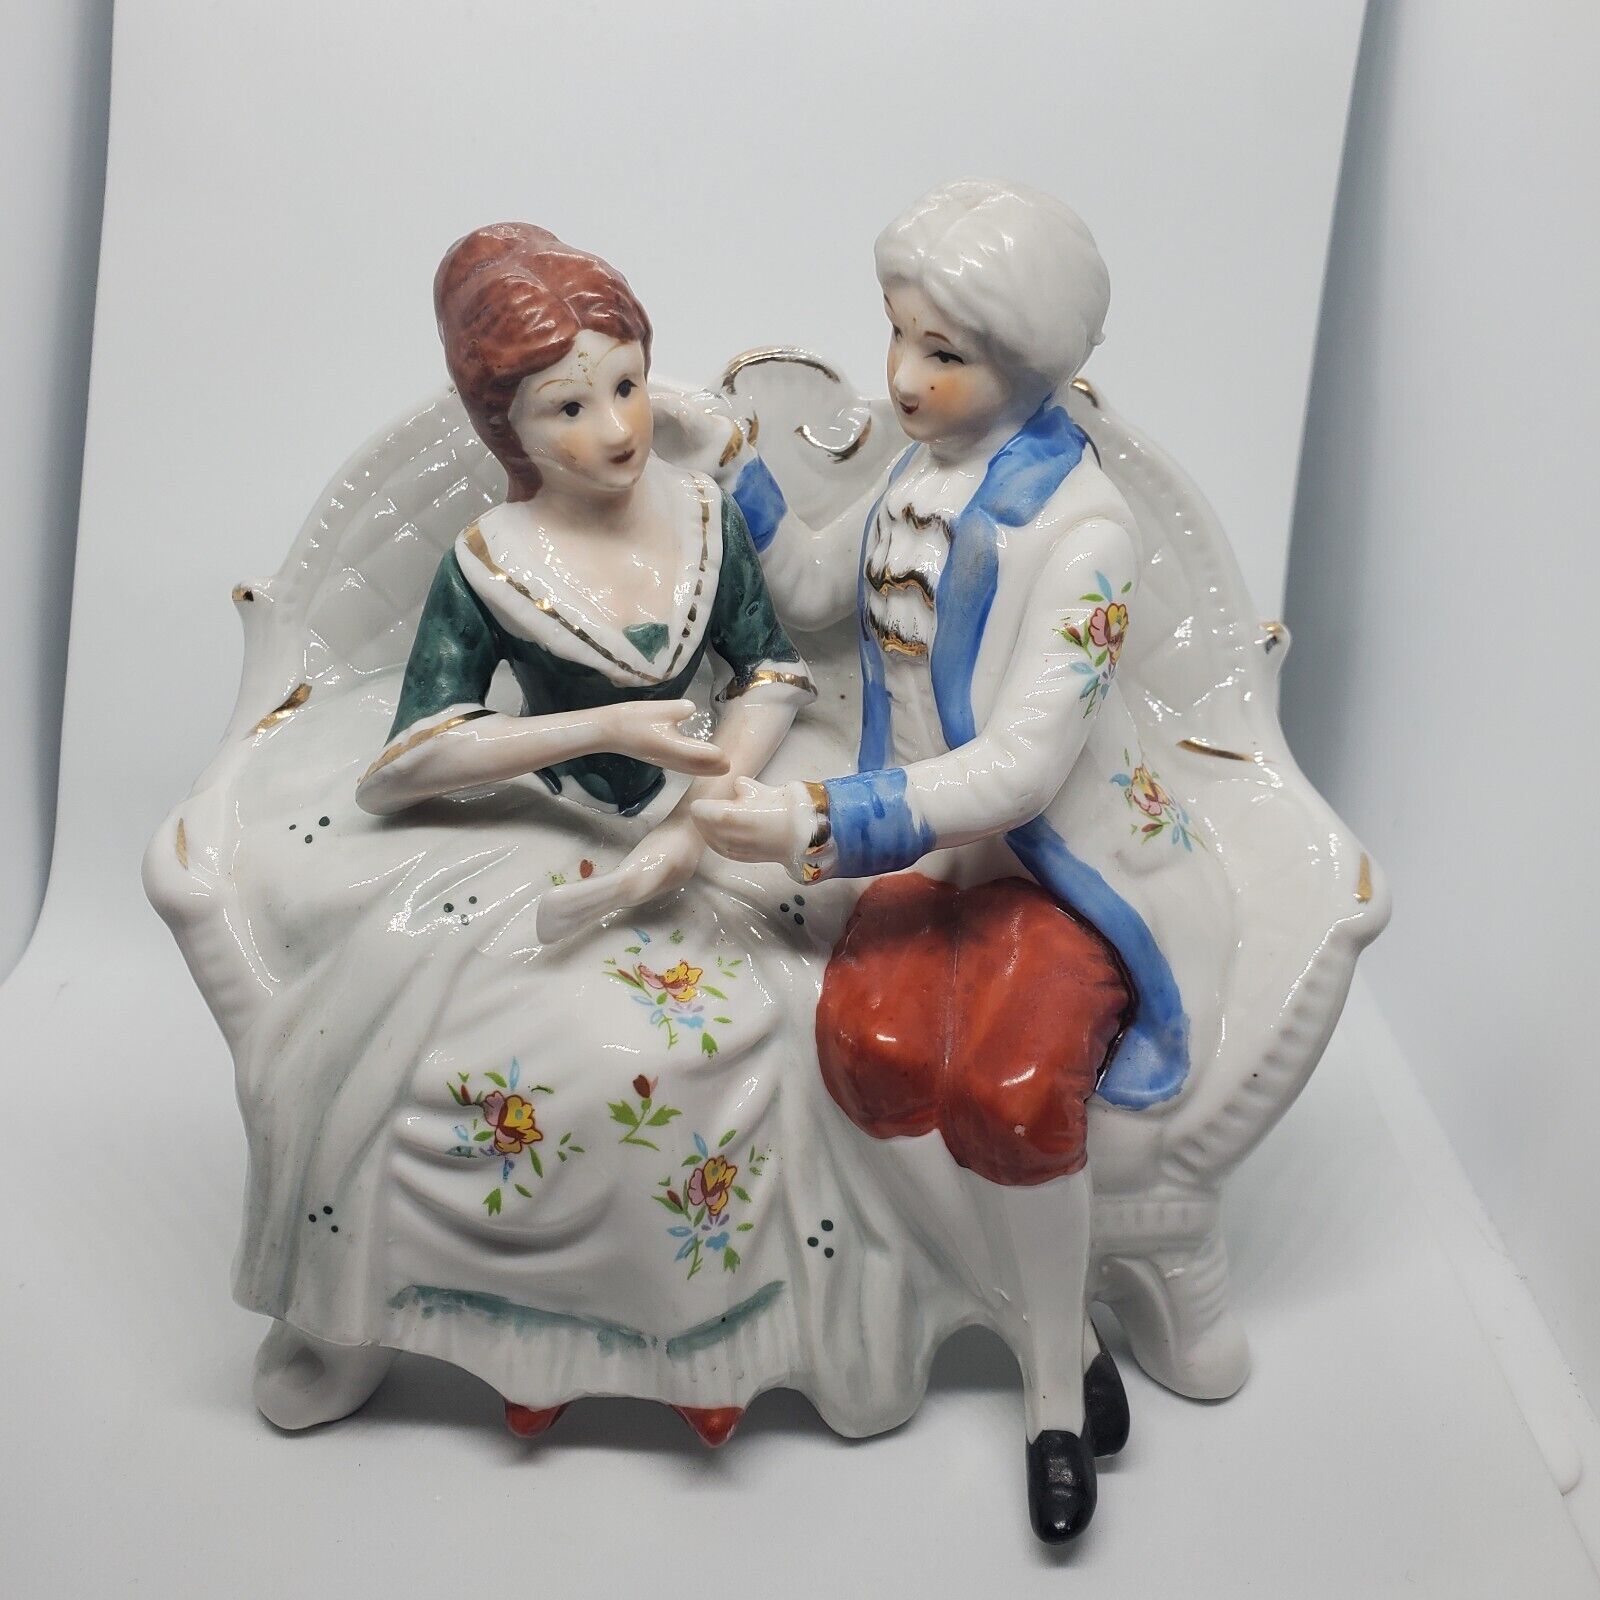 Vintage Porcelain French Provencal  Figurine Romantic Couple Lovers  W/ Couch